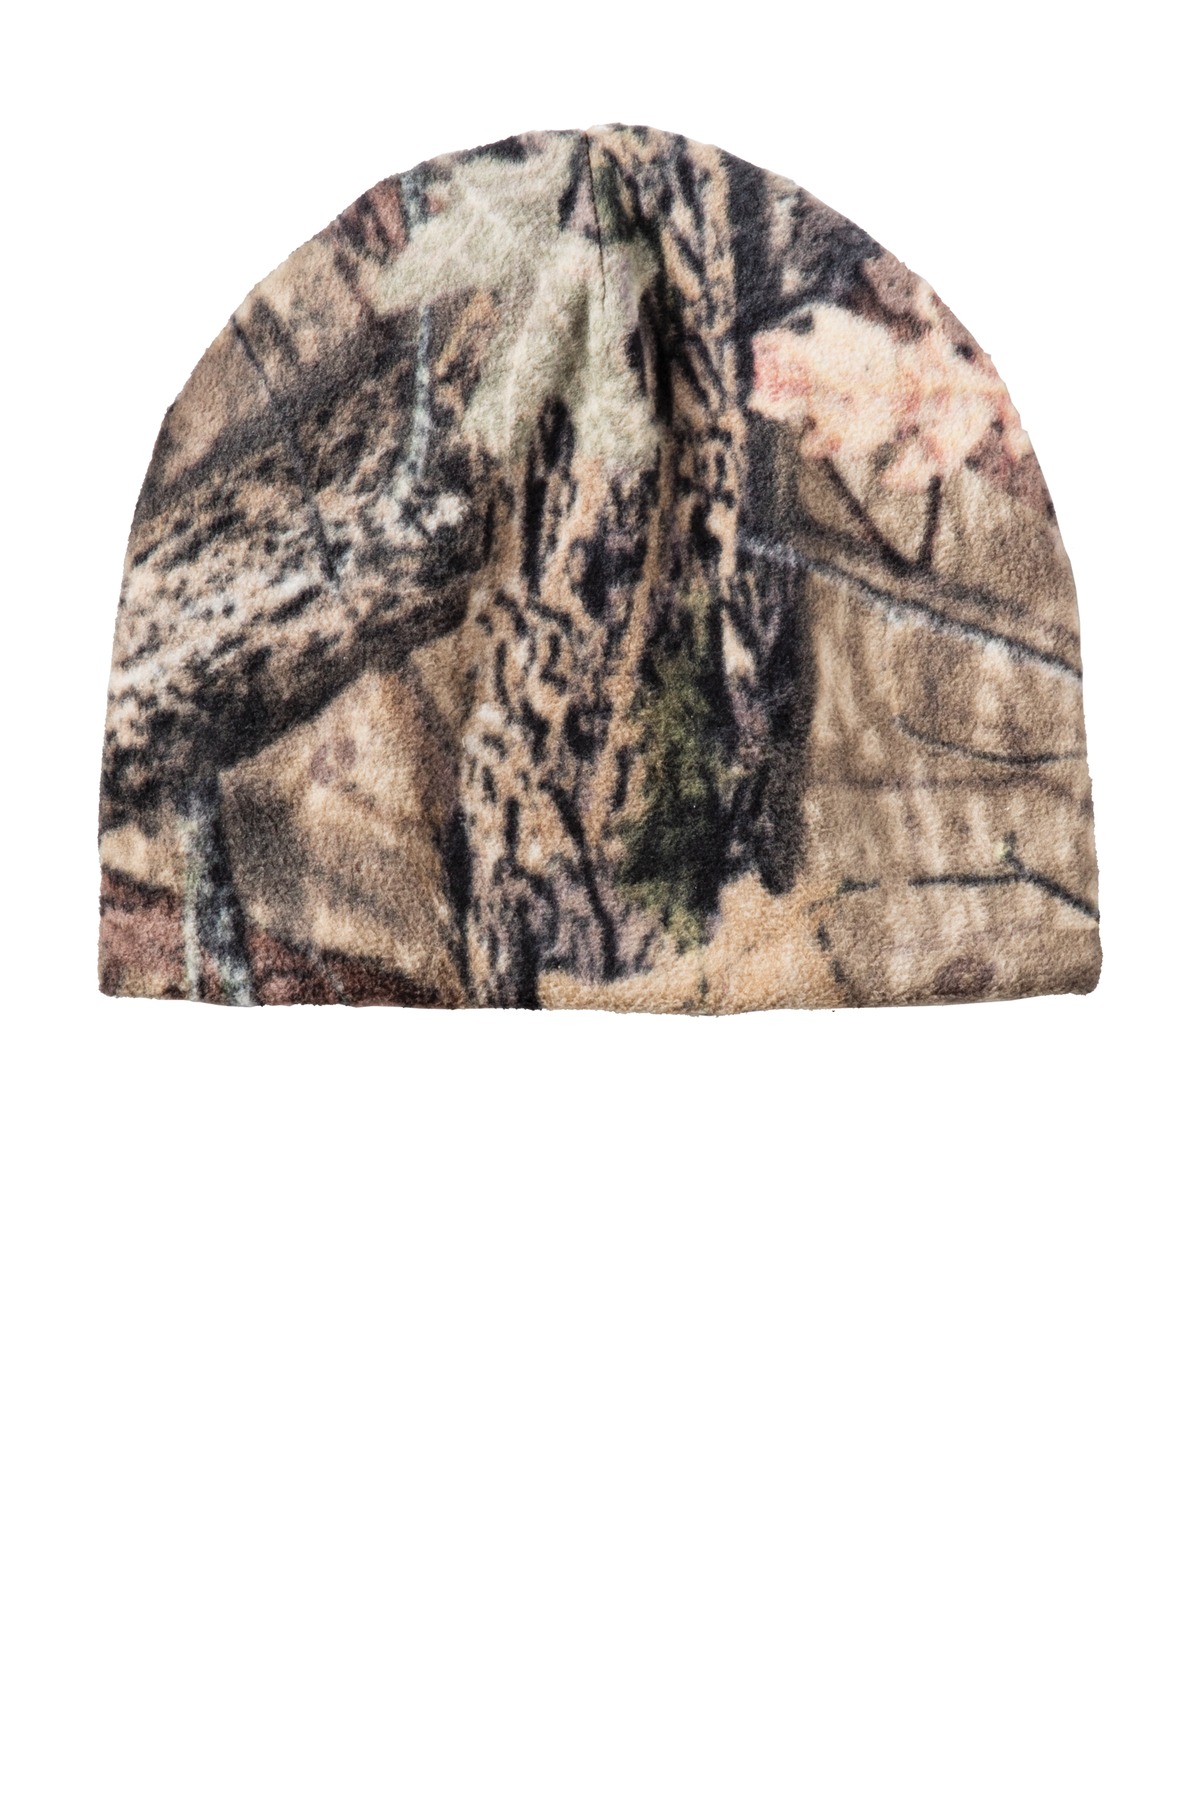 Selected Color is Mossy Oak Break-Up Country